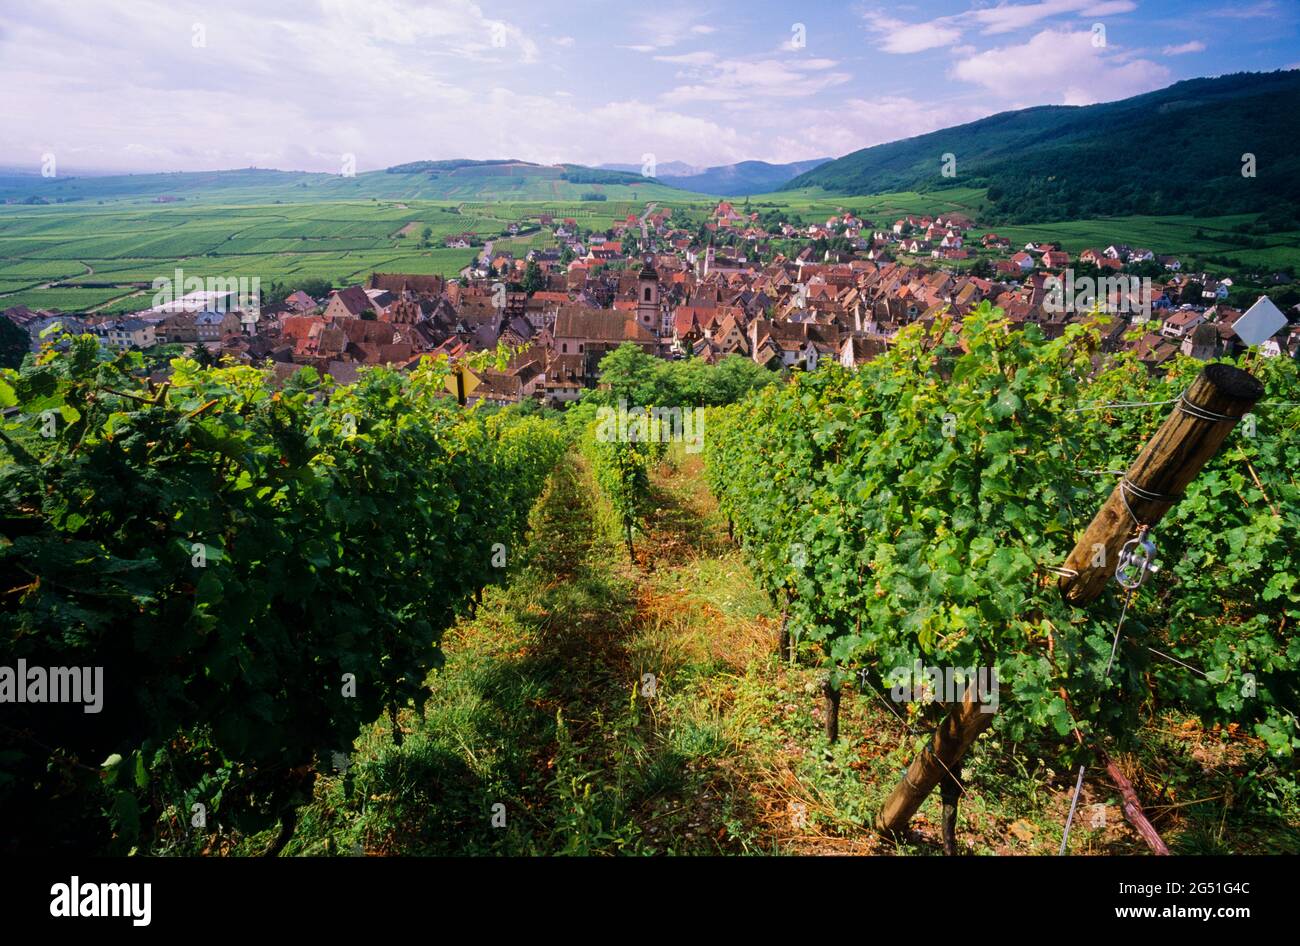 Village with vineyards, Riquewihr, Alsace, France Stock Photo